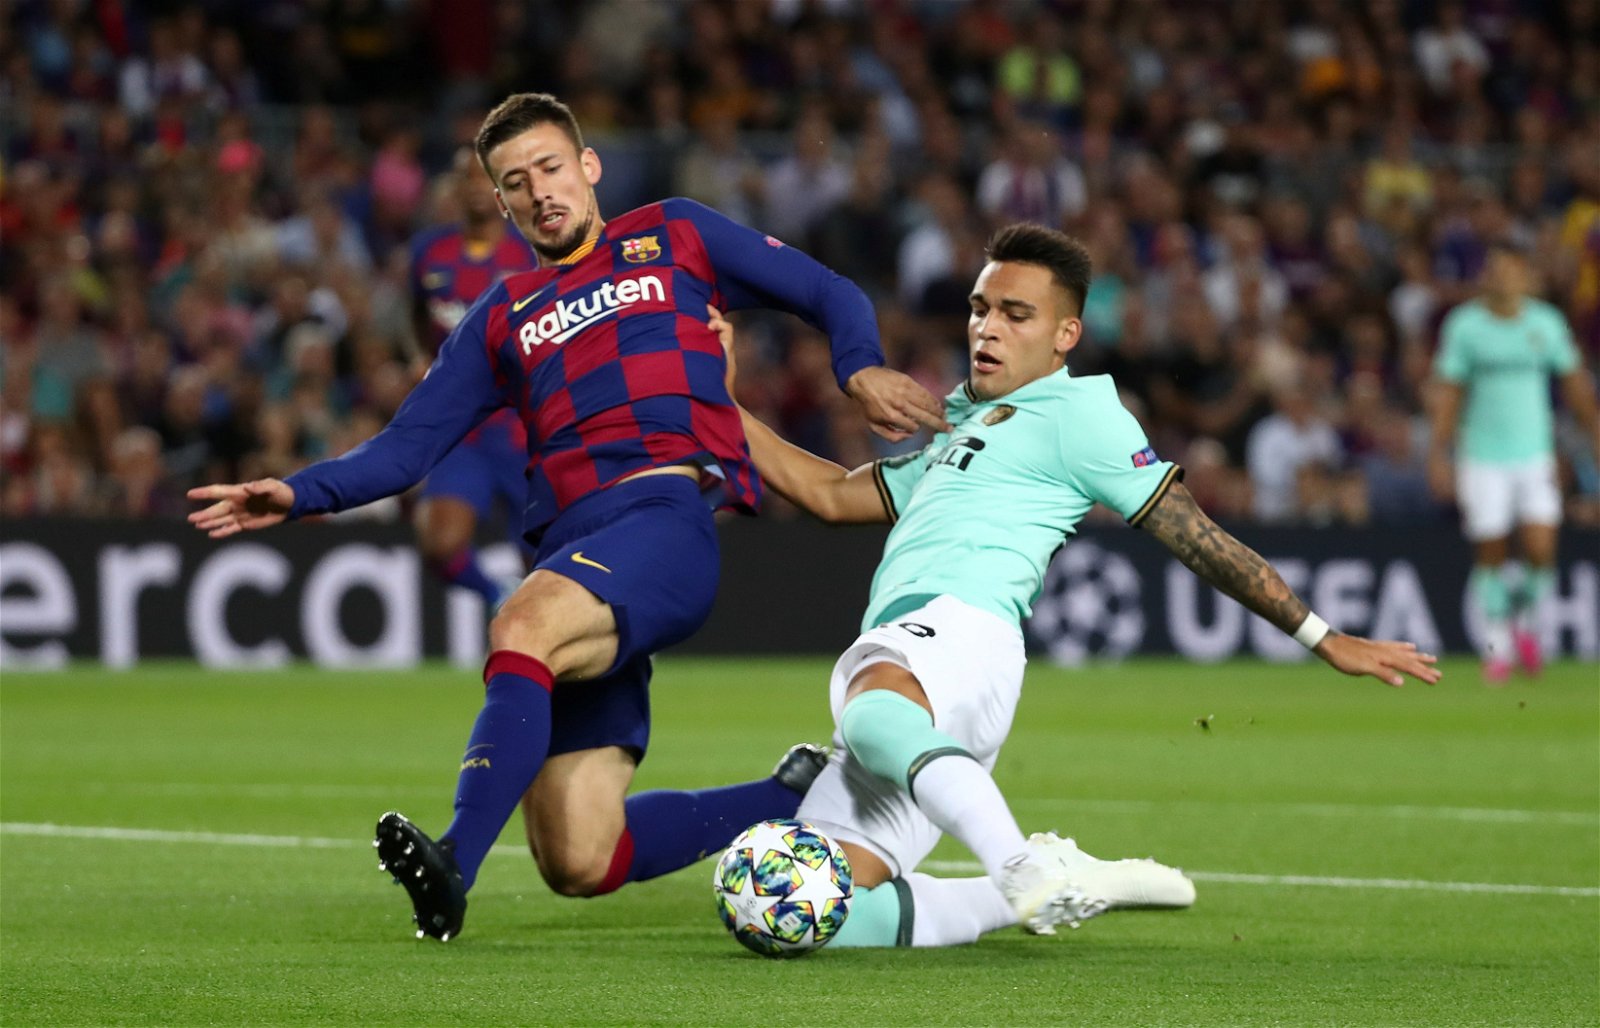 Top 5 Barcelona players with most tackles in 2019-20